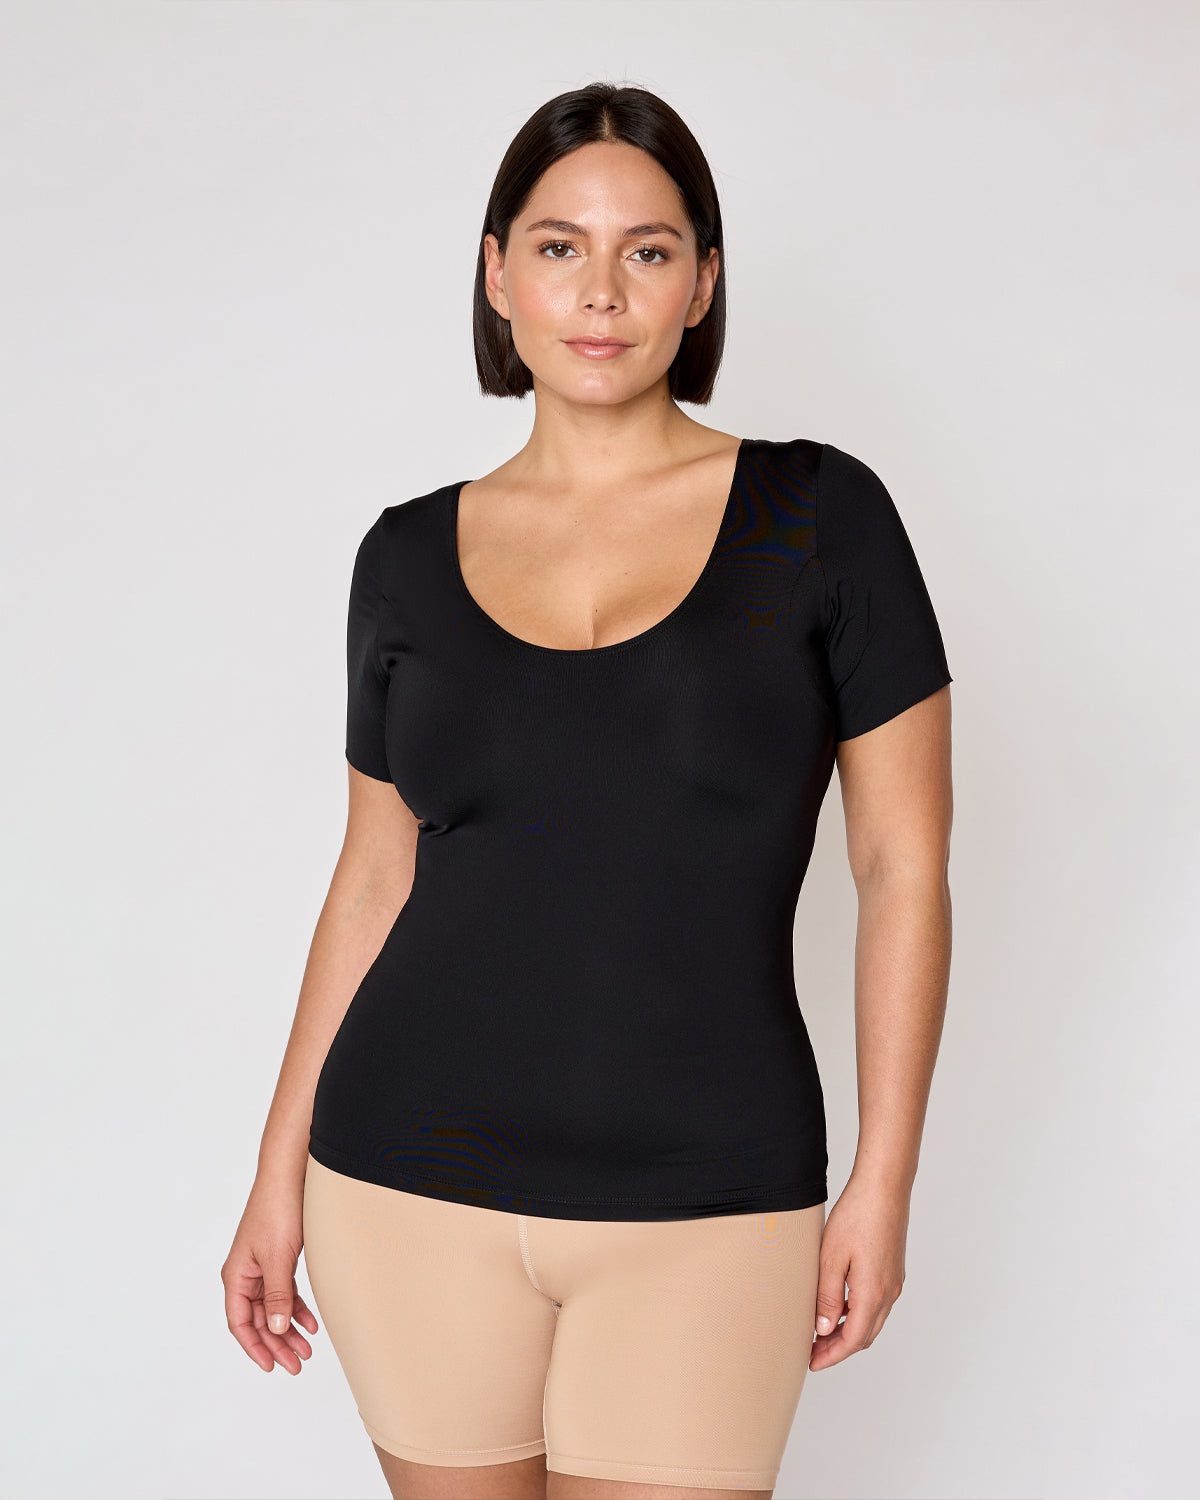 "#color_Black|Maya is 5'7" and wears a size L